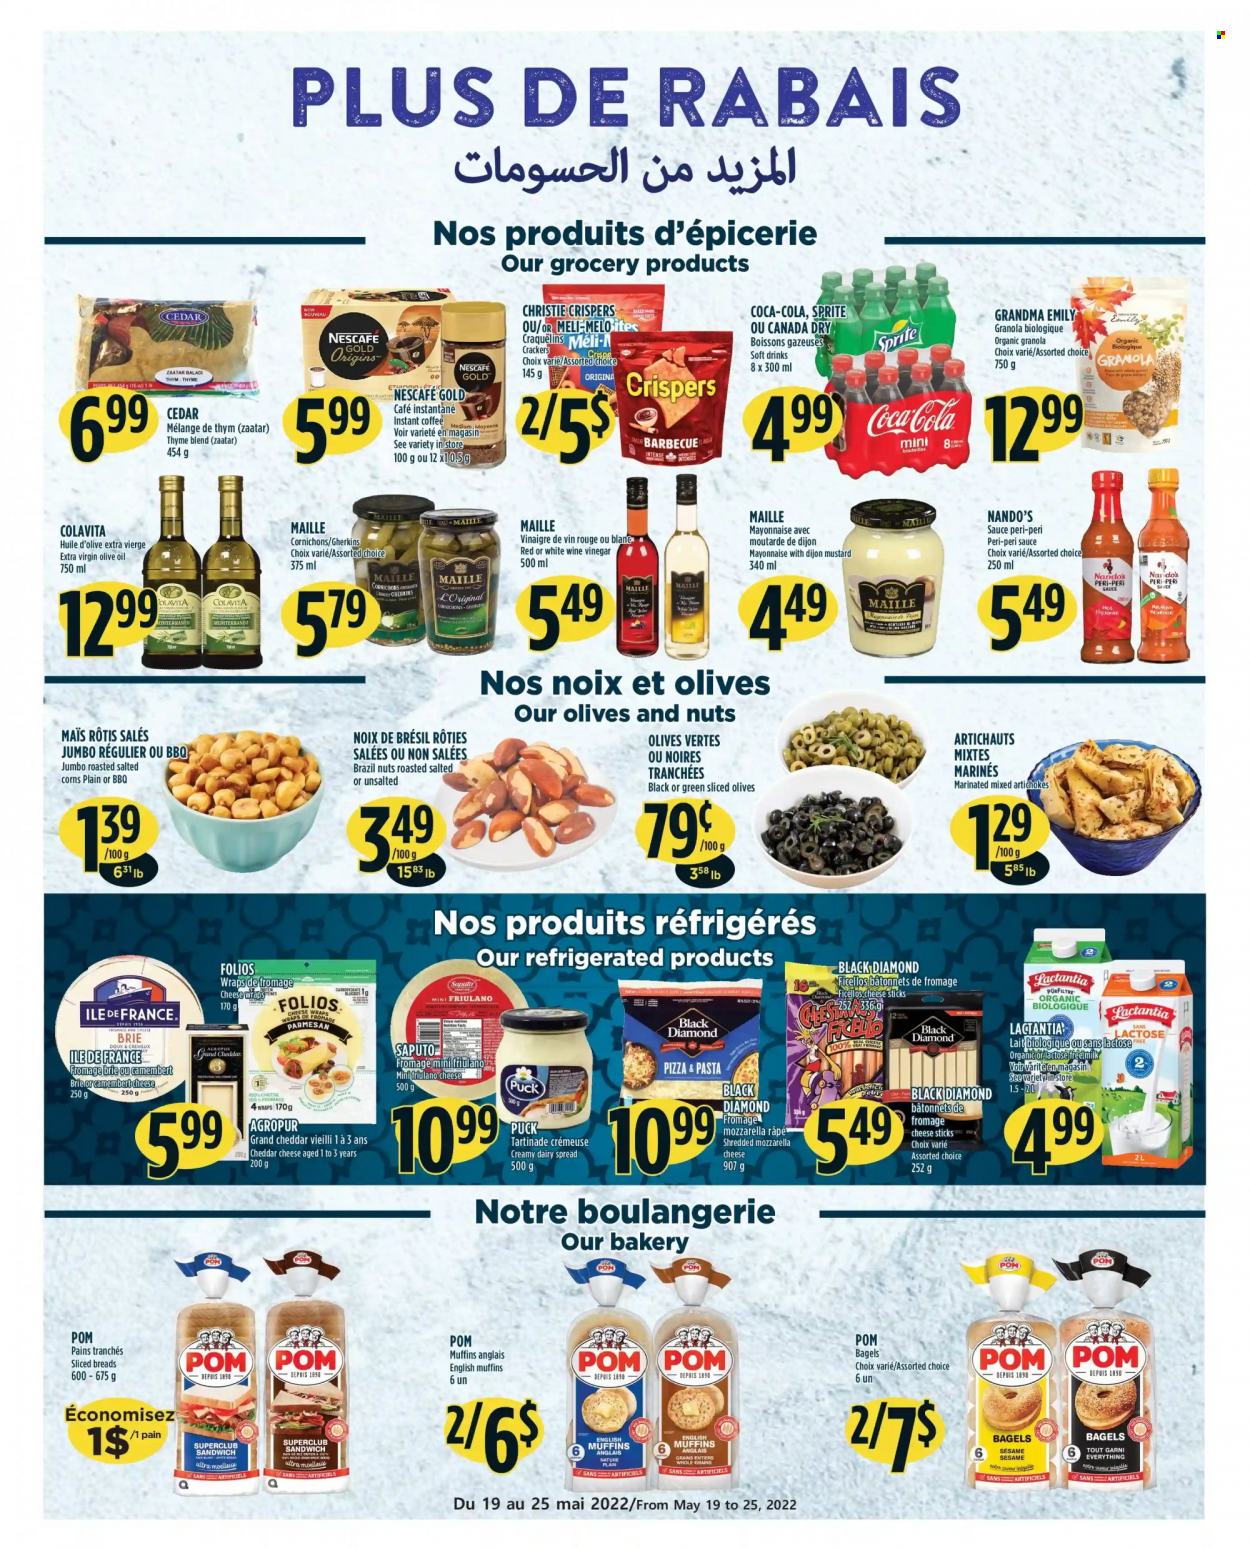 thumbnail - Adonis Flyer - May 19, 2022 - May 25, 2022 - Sales products - bagels, english muffins, wraps, artichoke, pizza, sandwich, pasta, sauce, cheddar, parmesan, brie, Puck, mayonnaise, cheese sticks, crackers, mustard, peri peri sauce, extra virgin olive oil, vinegar, wine vinegar, olive oil, oil, brazil nuts, Canada Dry, Coca-Cola, Sprite, soft drink, instant coffee, sake, camembert, granola, olives, Nescafé. Page 7.